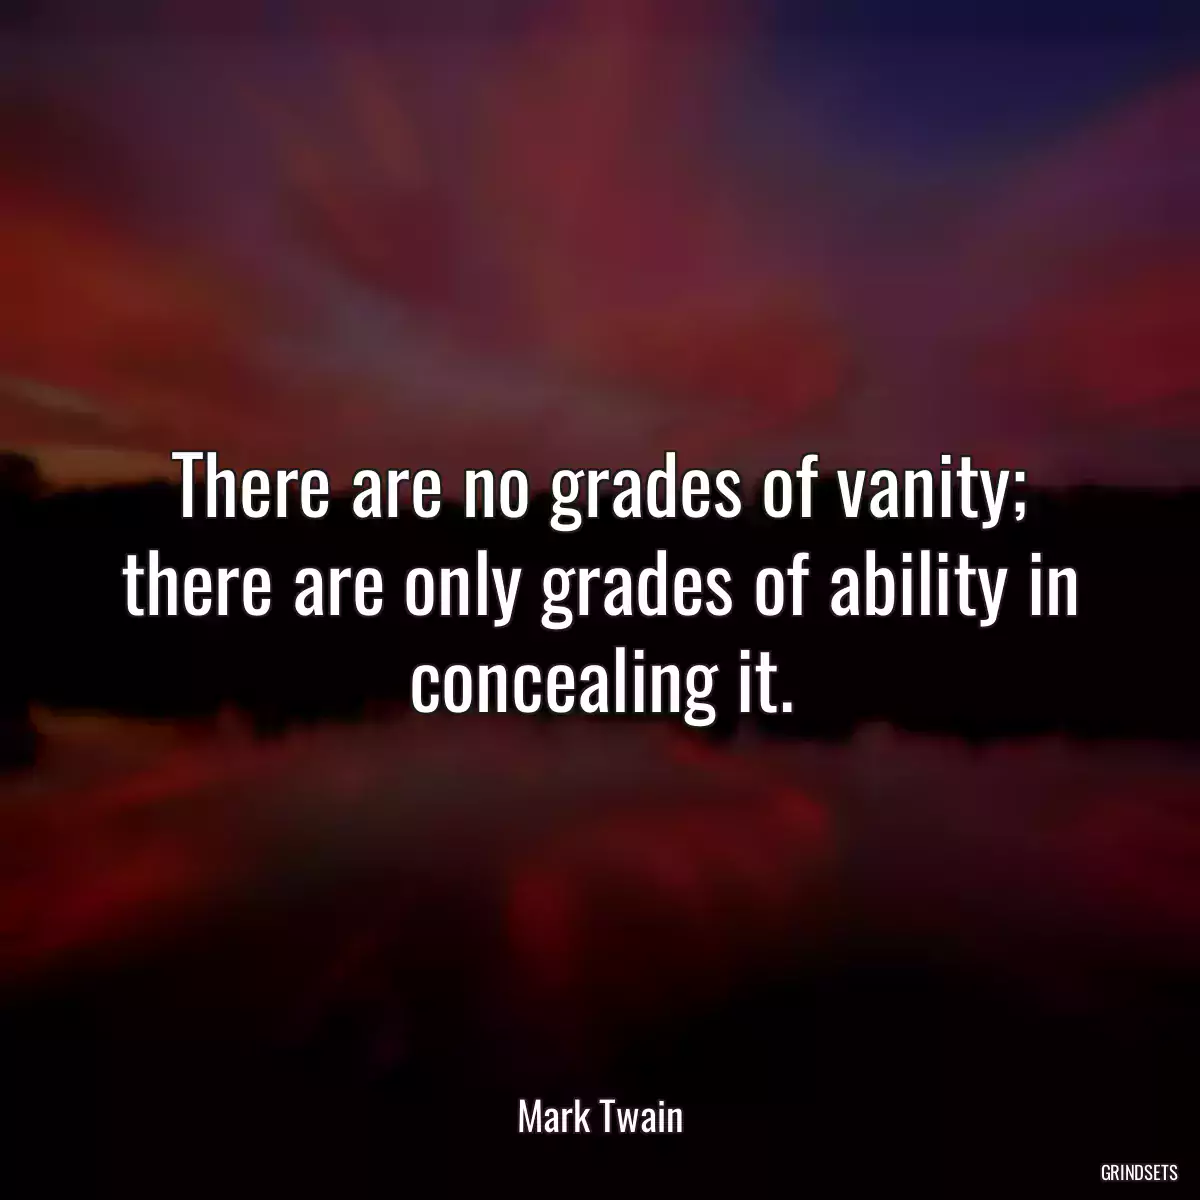 There are no grades of vanity; there are only grades of ability in concealing it.